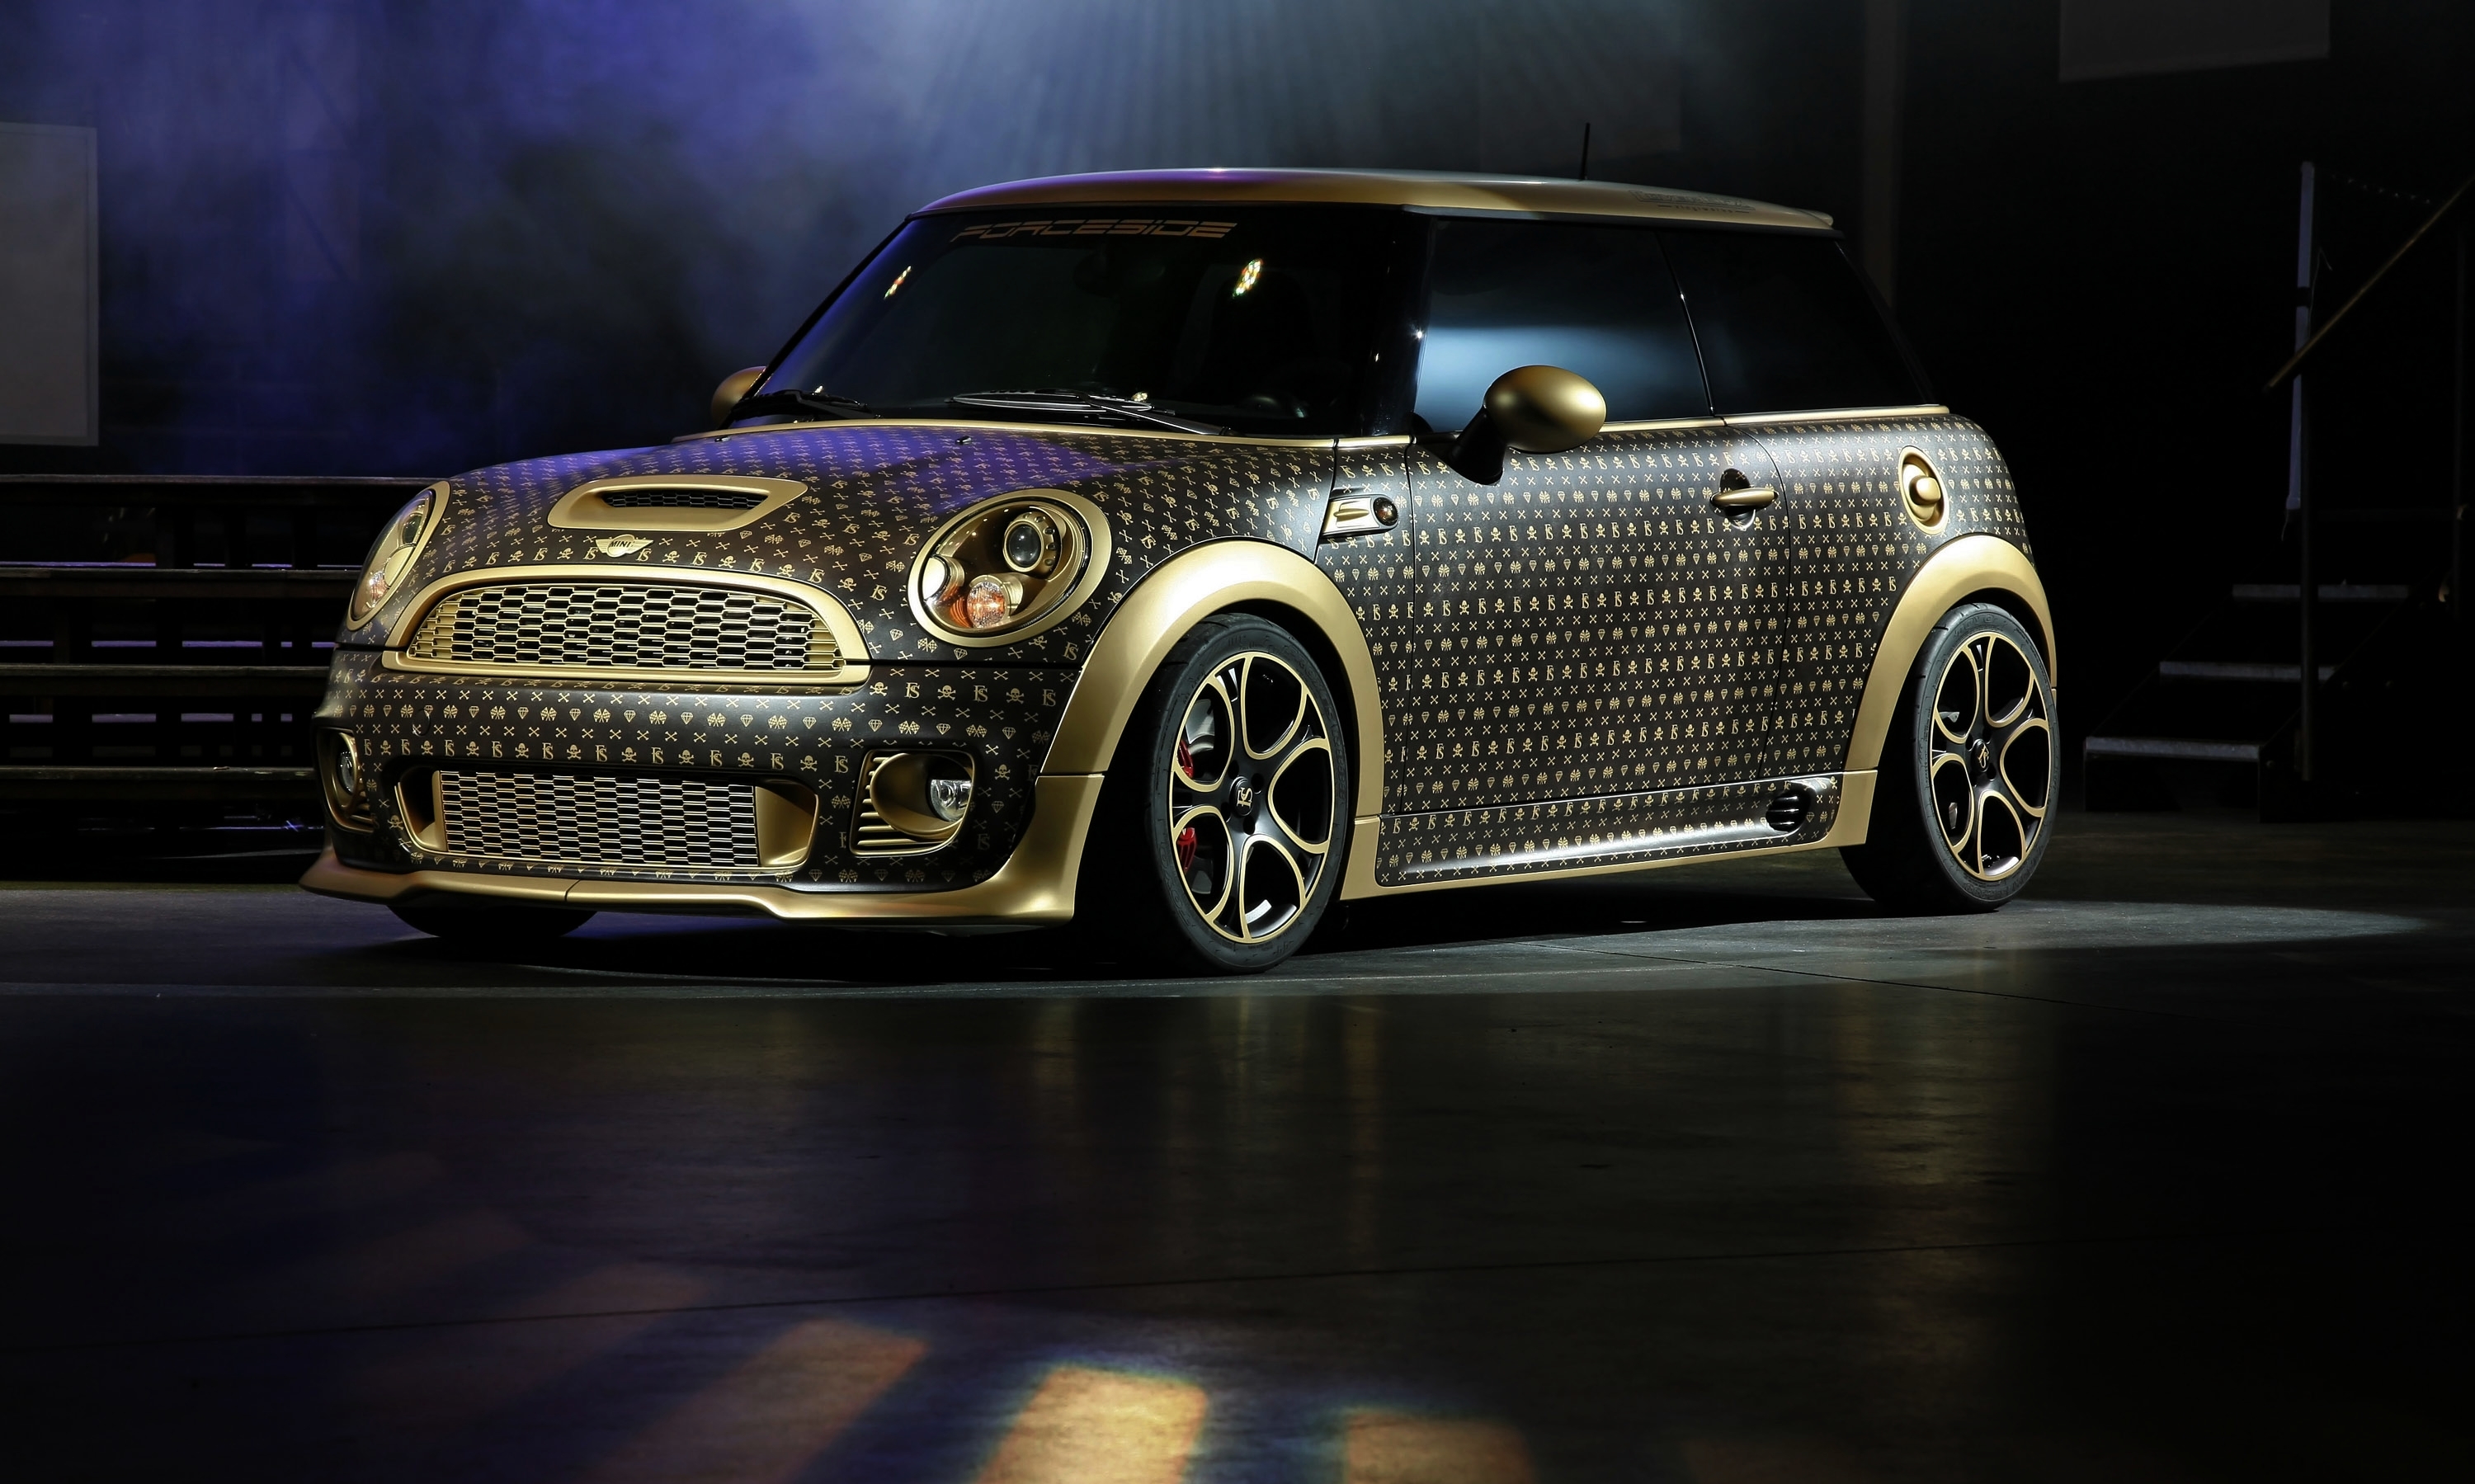 mini, mini cooper, john cooper works, cars collection of HD images